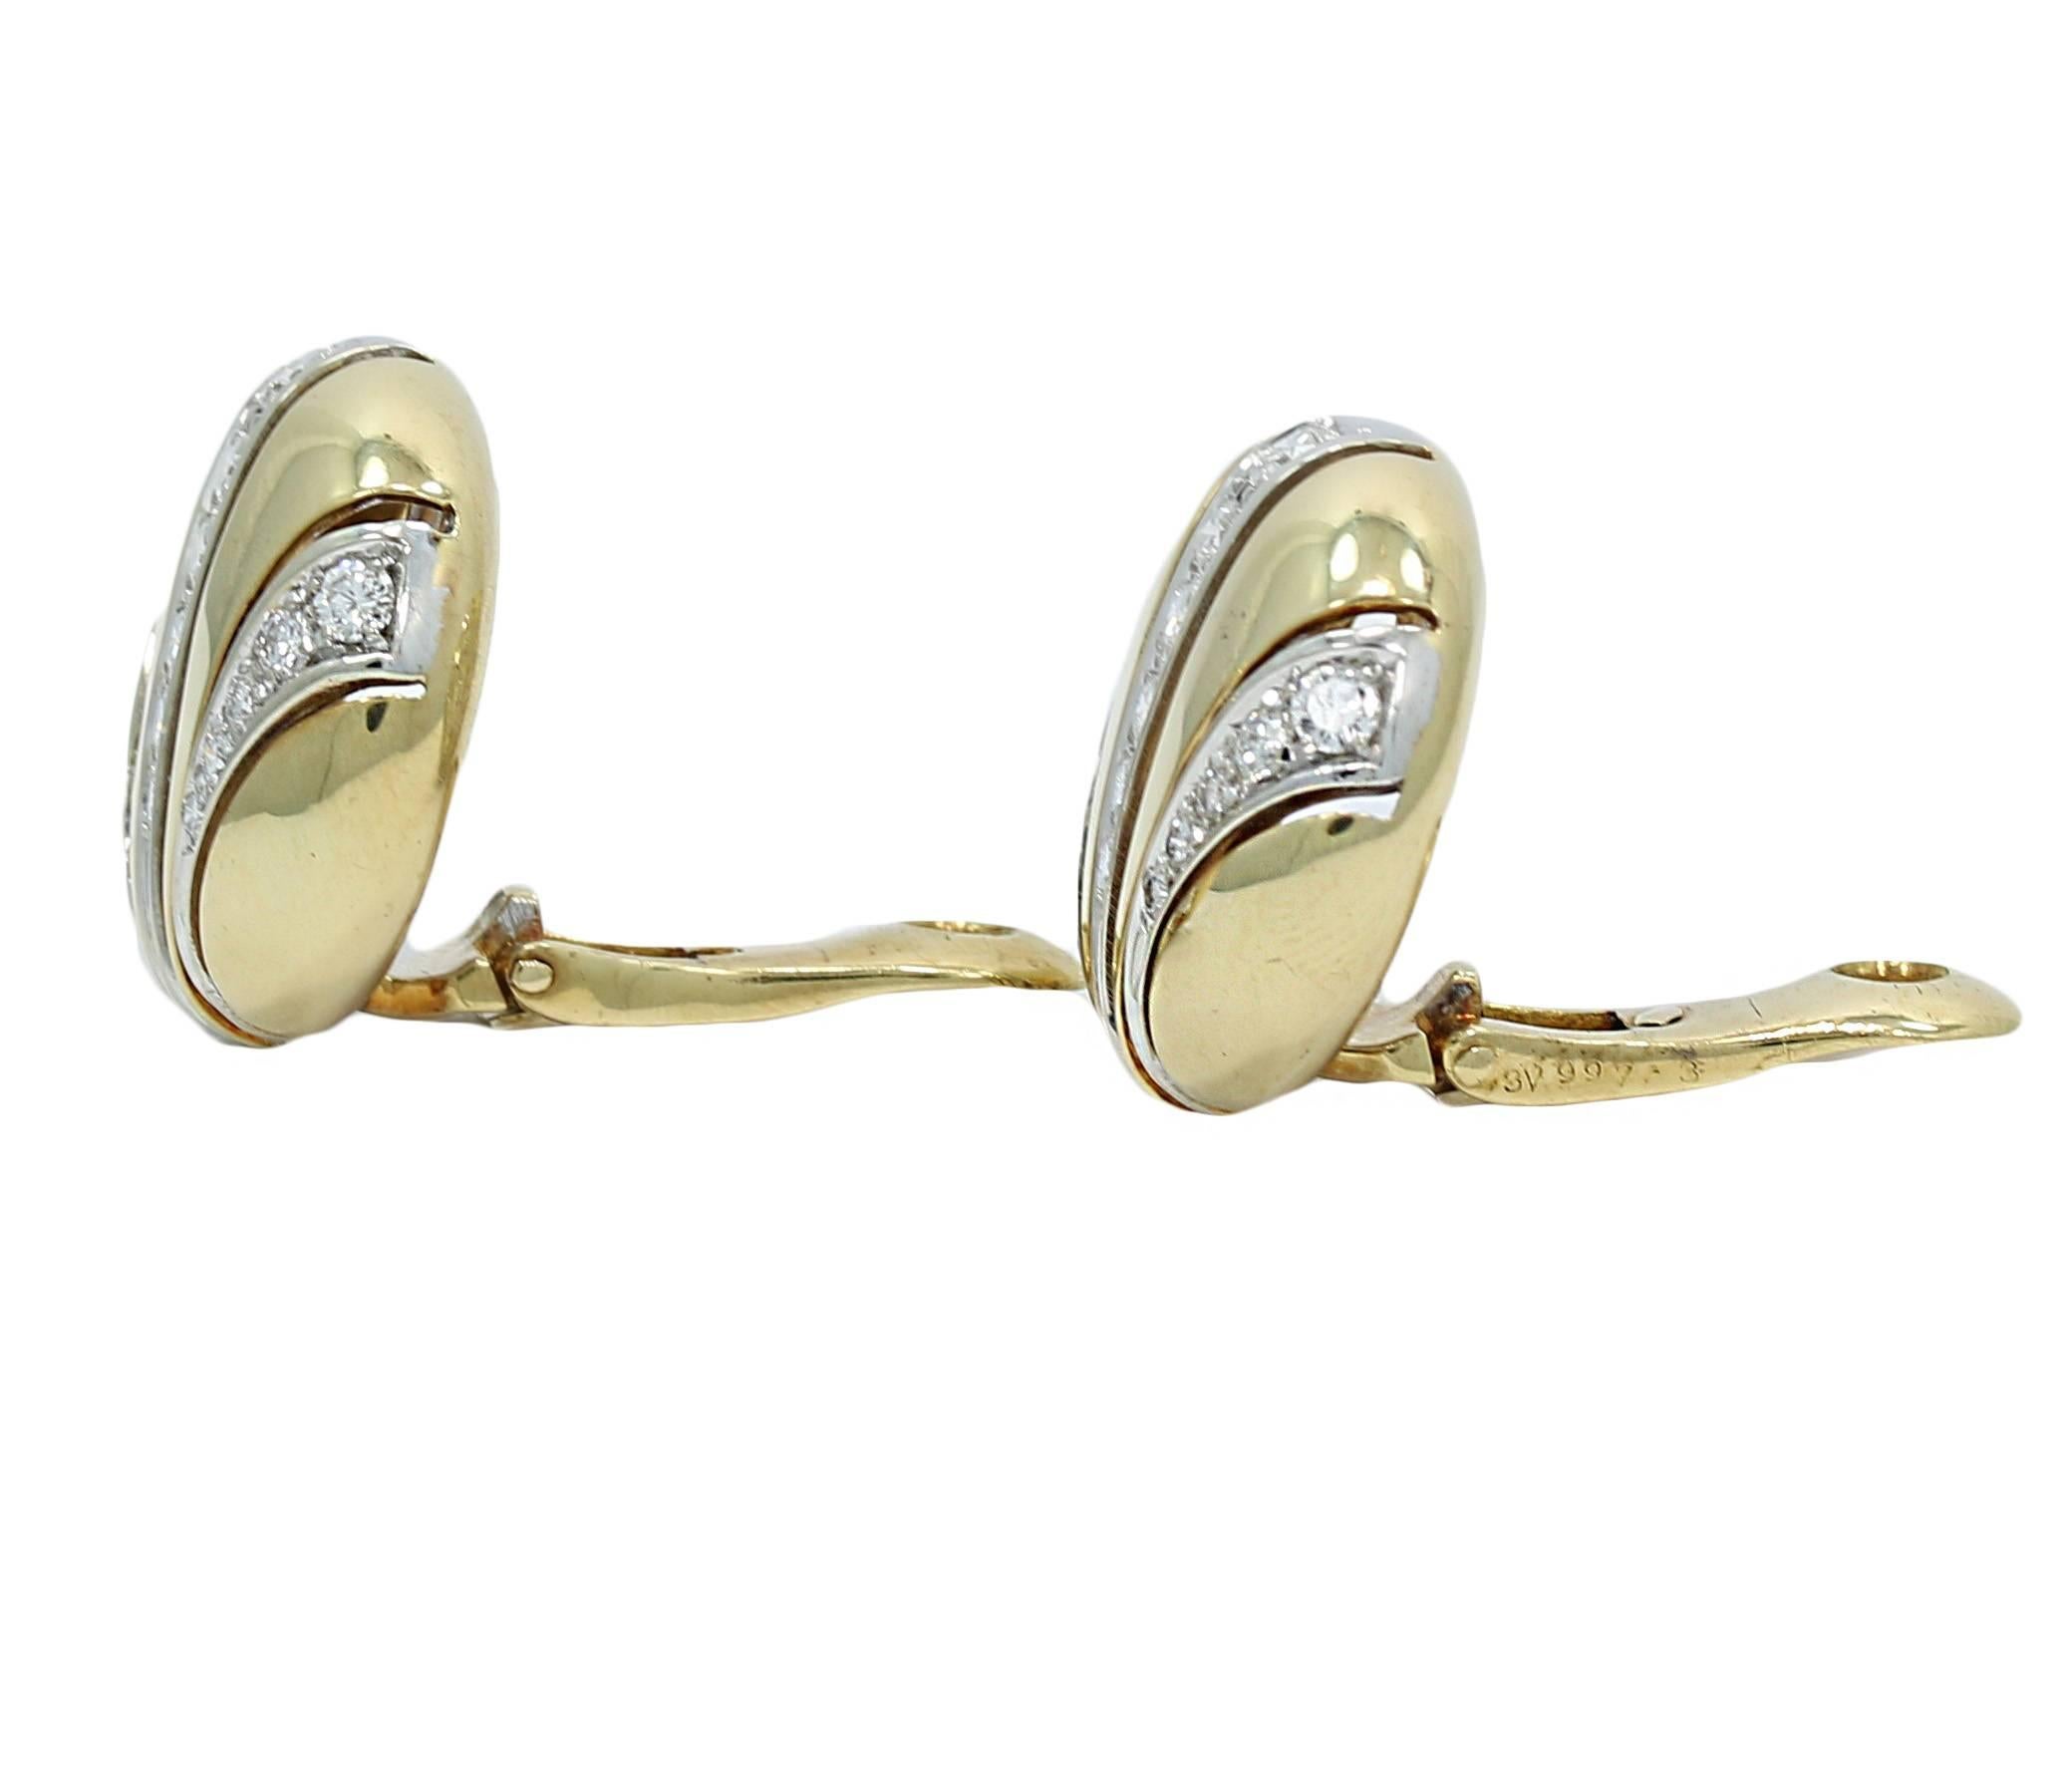 We have these Van Cleef and Arpels 18k yellow gold diamond earrings. They have thirty two (32) diamonds approximately .50 carats total weight. They measure 0.875" in height and weigh a total of 18.9 grams. They are stamped with serial number